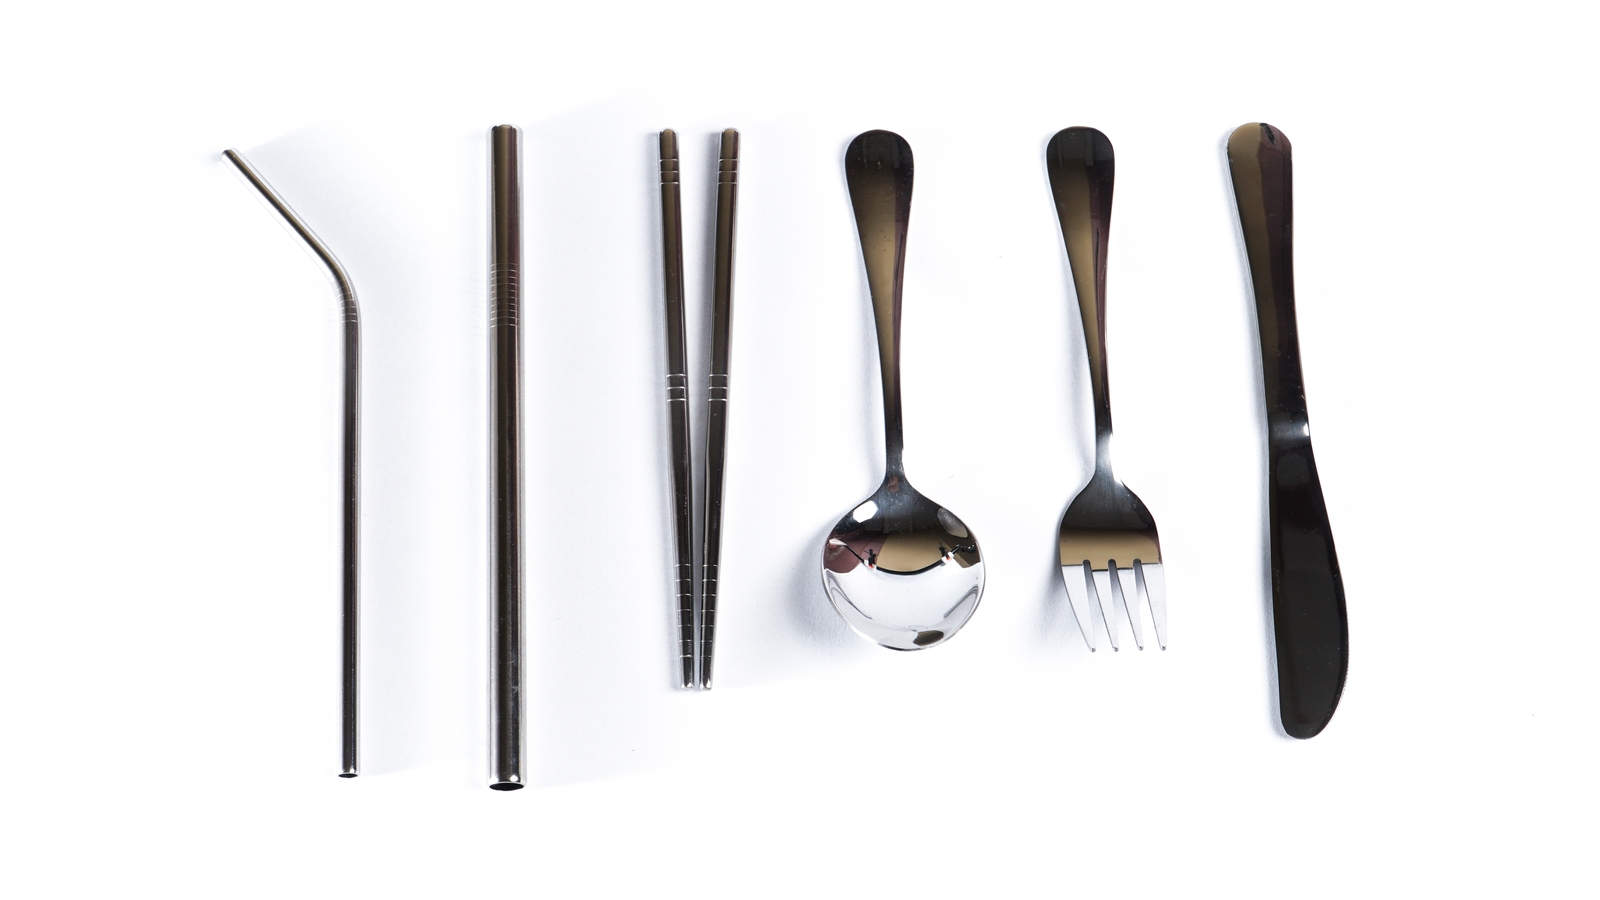 <p>The last item on the list is a cutlery set. Each set includes one knife, fork, spoon, straw, and chopsticks and comes in a durable box. </p>  <p>Instead of searching for cutlery or forgetting one at home, just grab what you need right from the box.</p>  <p>Also, they have many customizable sets designed for camping. So find the one that suits your personality and make it a keepsake for all your camping road trips.</p>